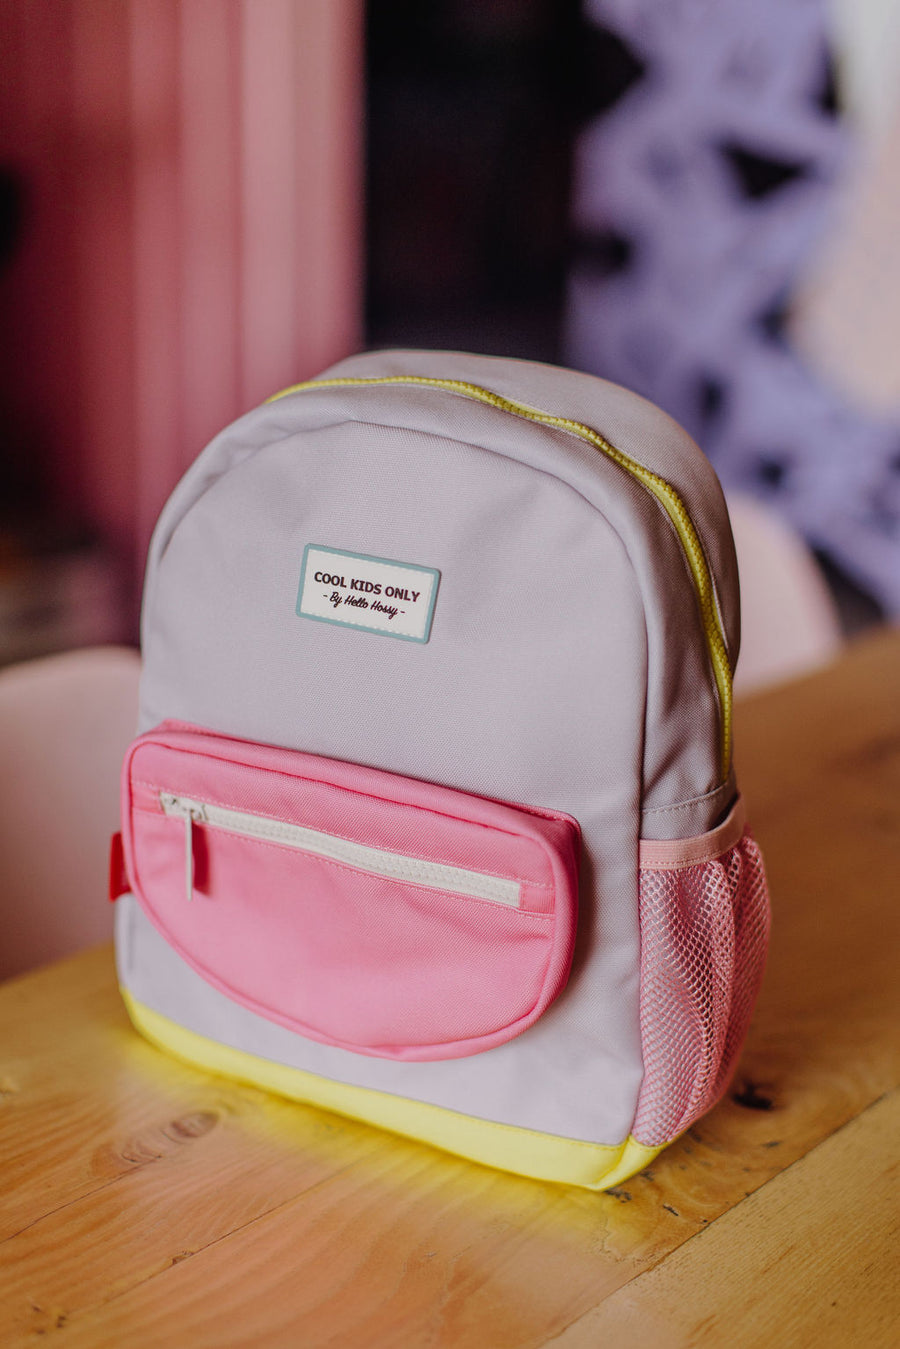 Mini Mouse backpack (6 years+) - Hello Hossy 